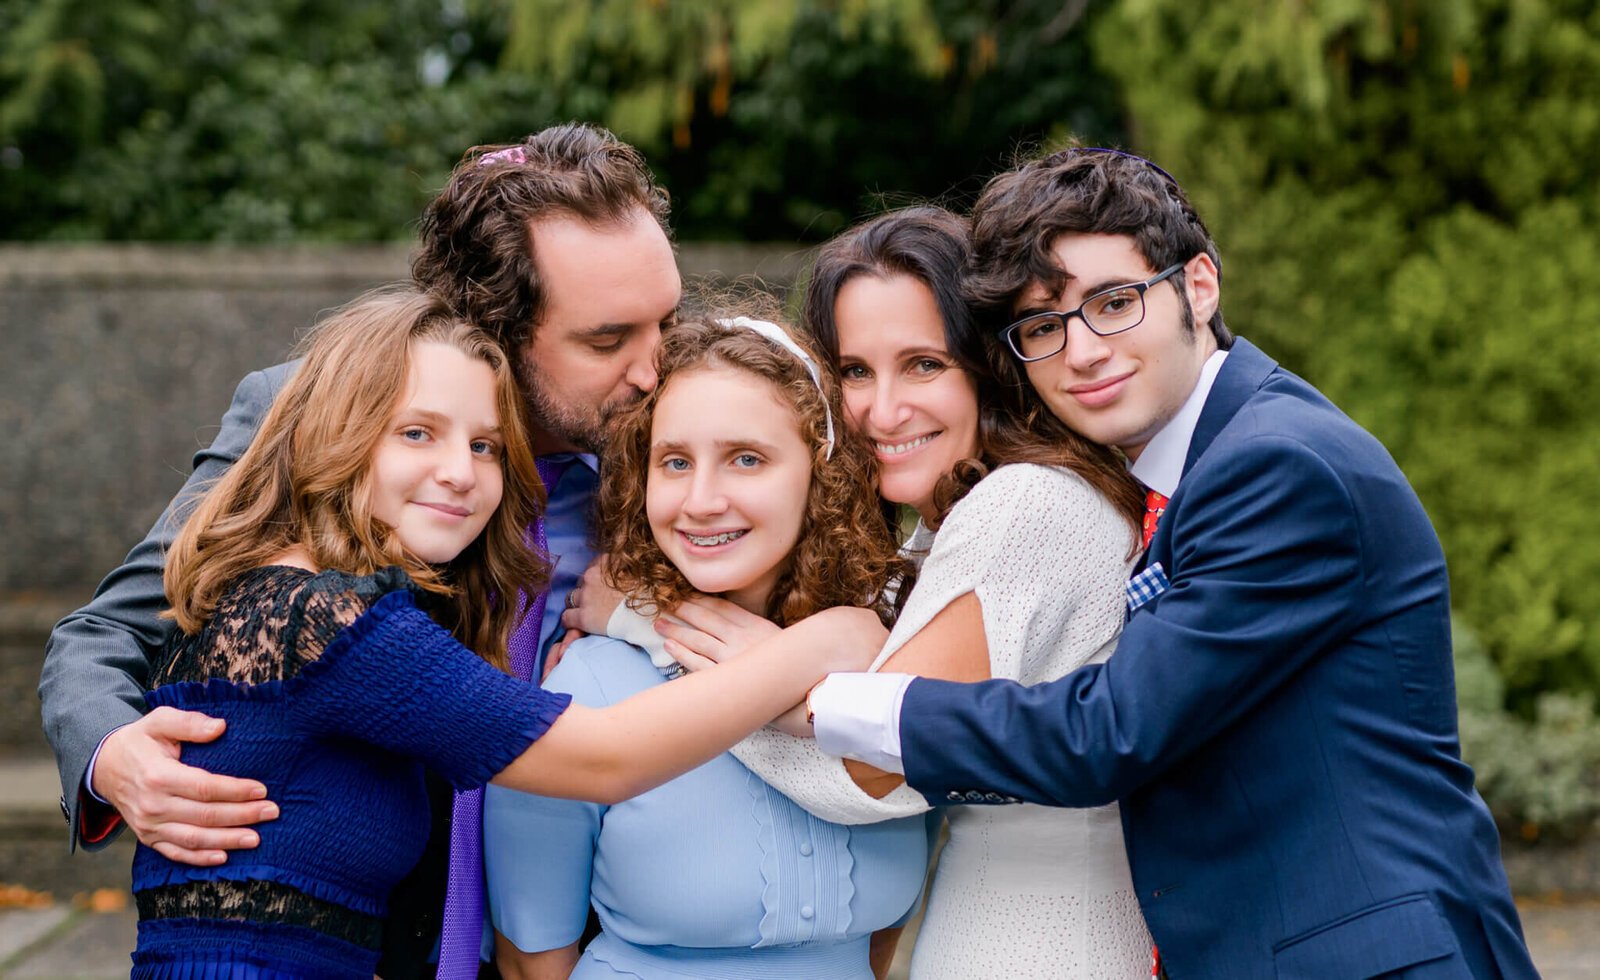 A teen girl is hugged by her parents and big brother and sister in a temple garden